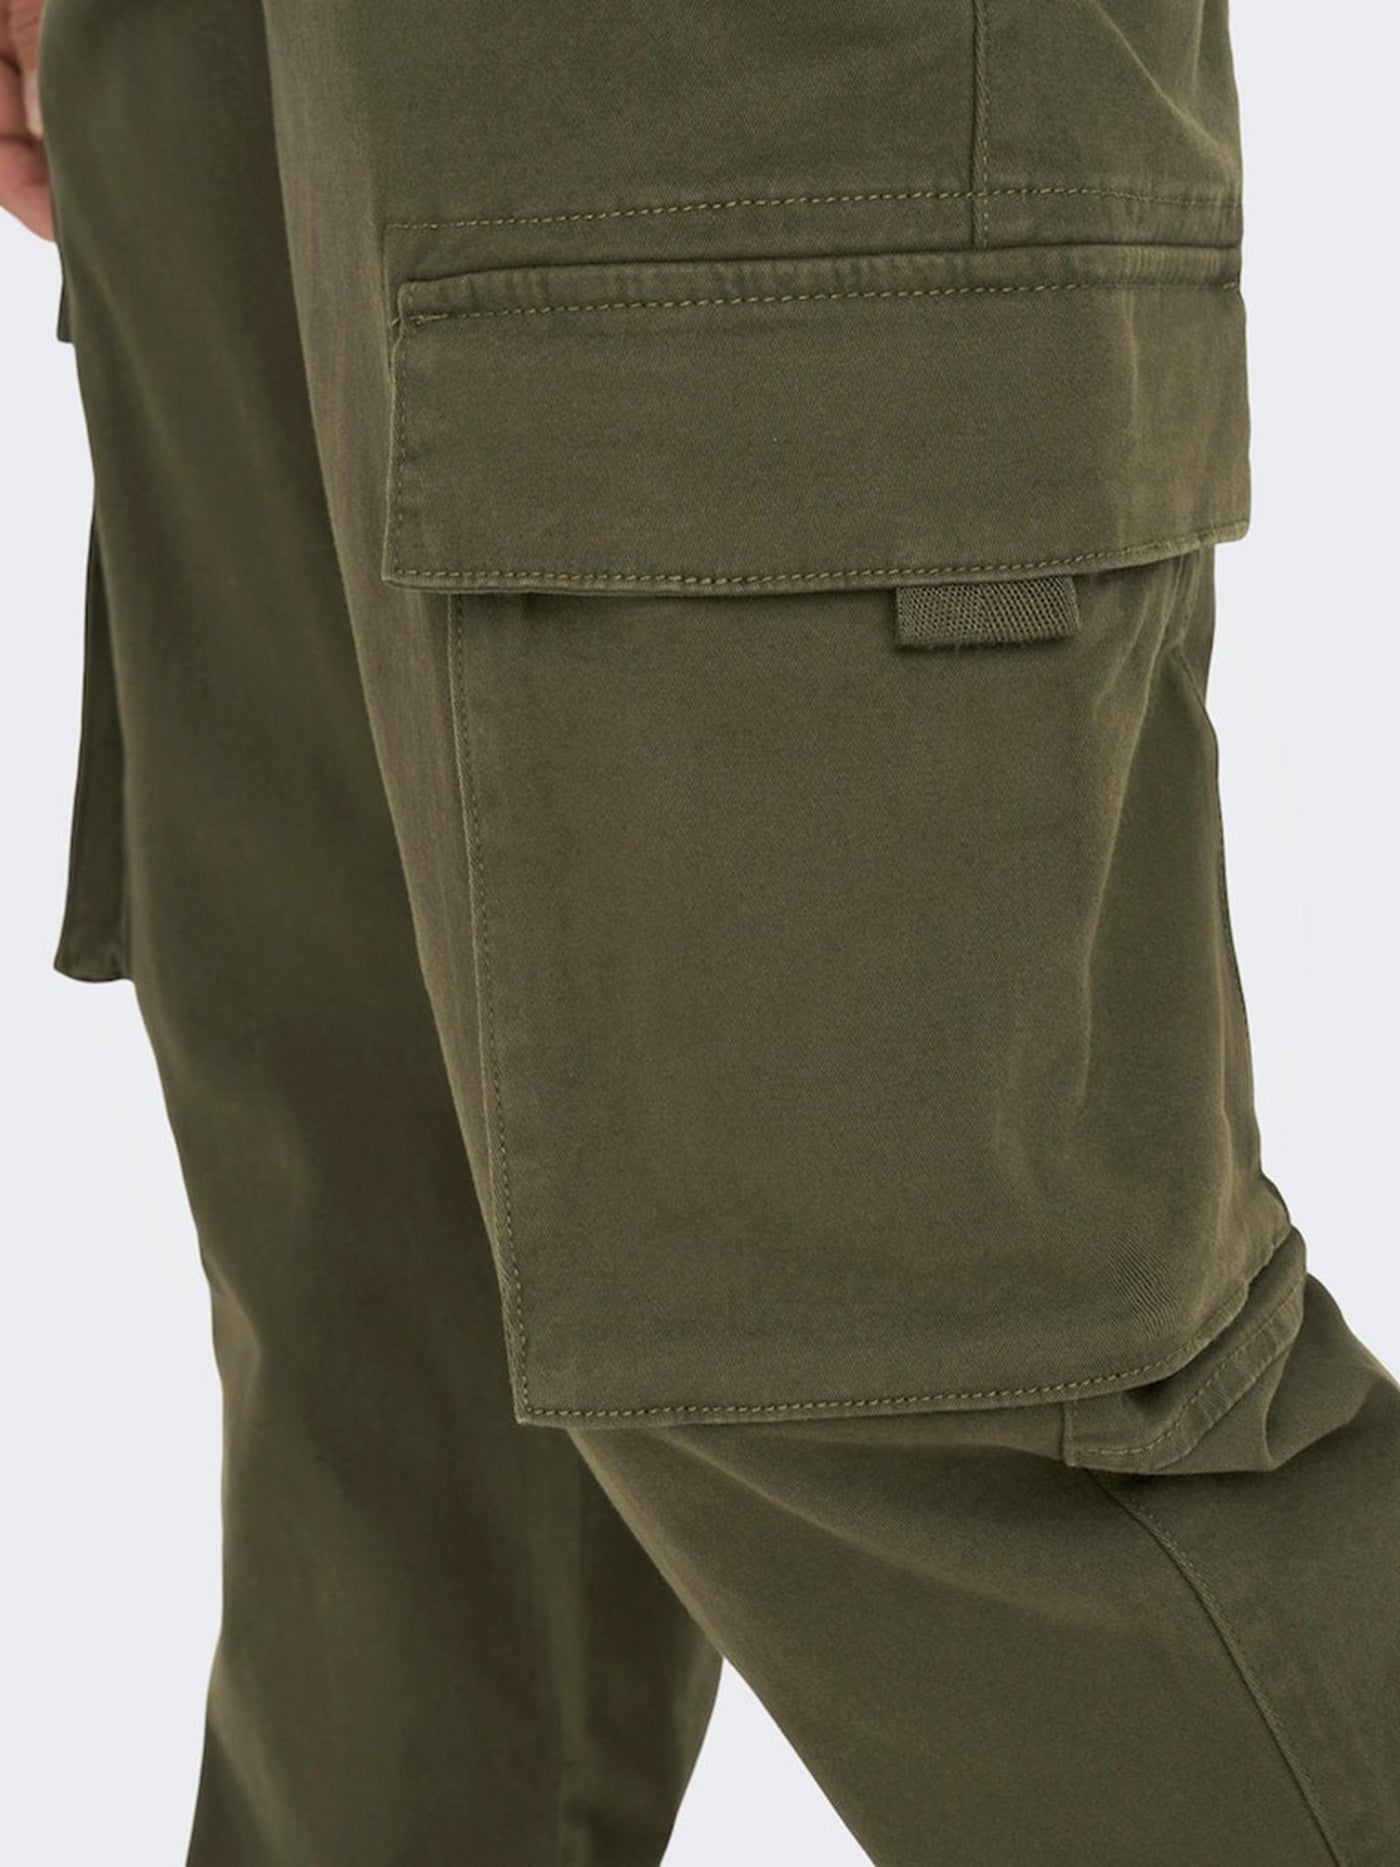 Next Cargo Pants - Olive Night - Only & Sons 2